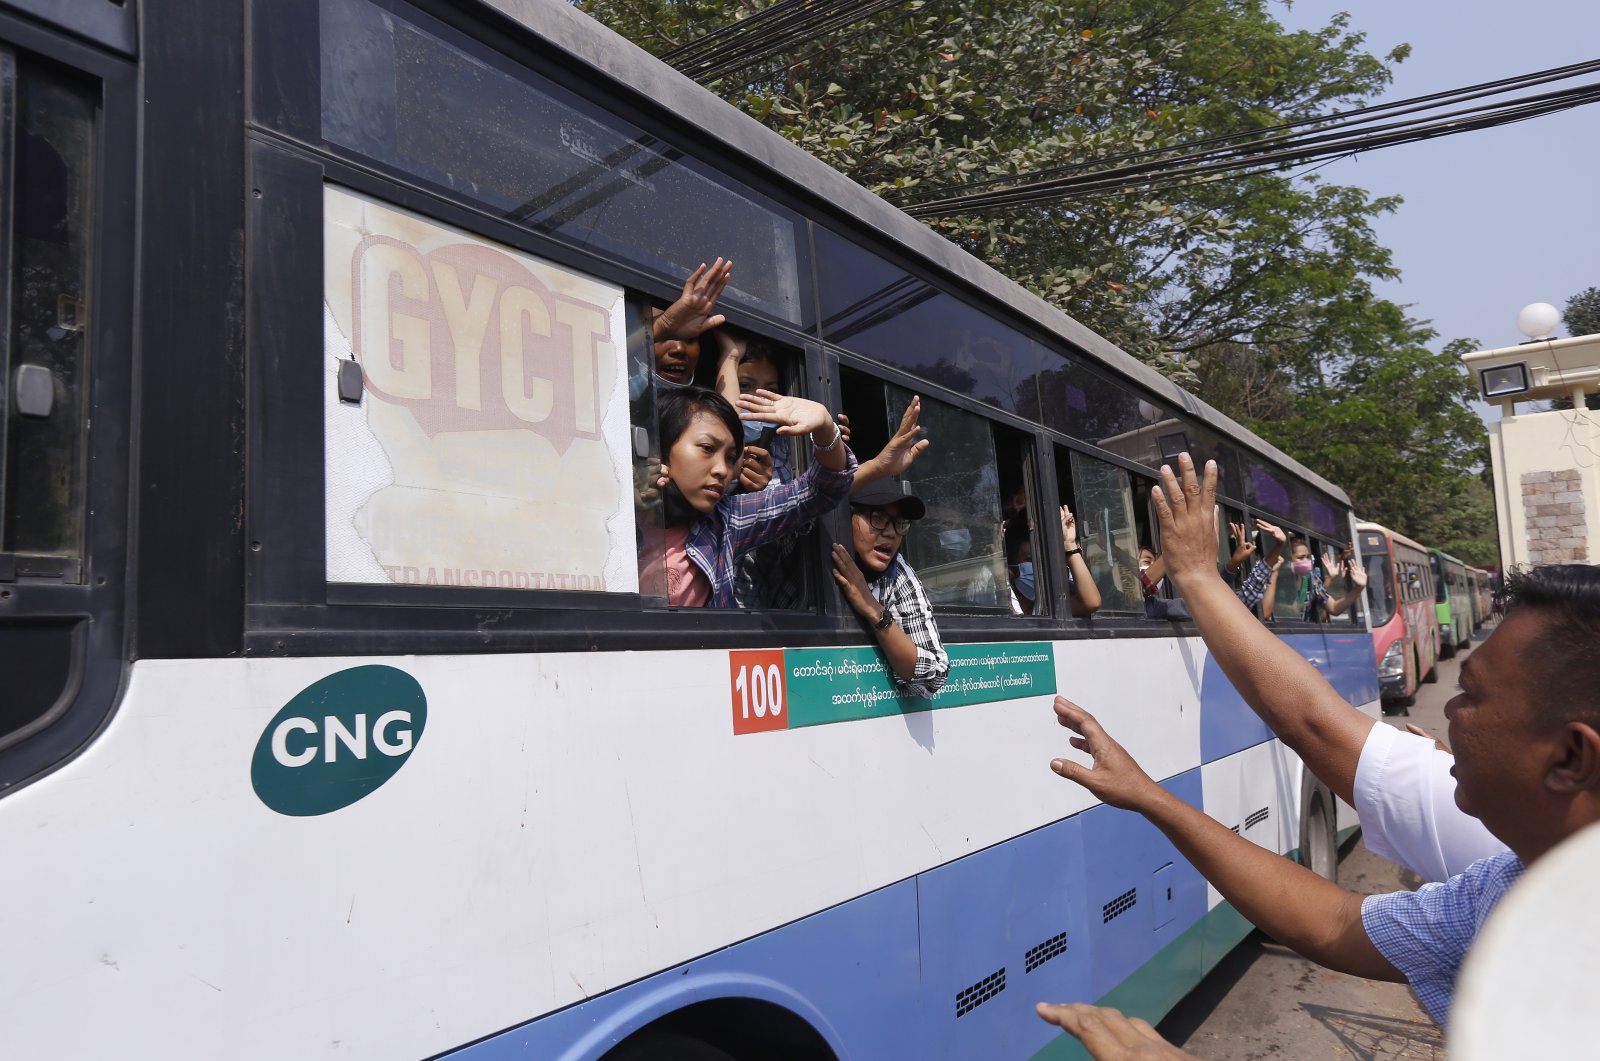 Arrested protesters wave to people while on board a bus that is part of a convoy of buses getting out of Insein prison and will transport them to an undisclosed location in Yangon, Myanmar, March 24, 2021. (AP Photo)